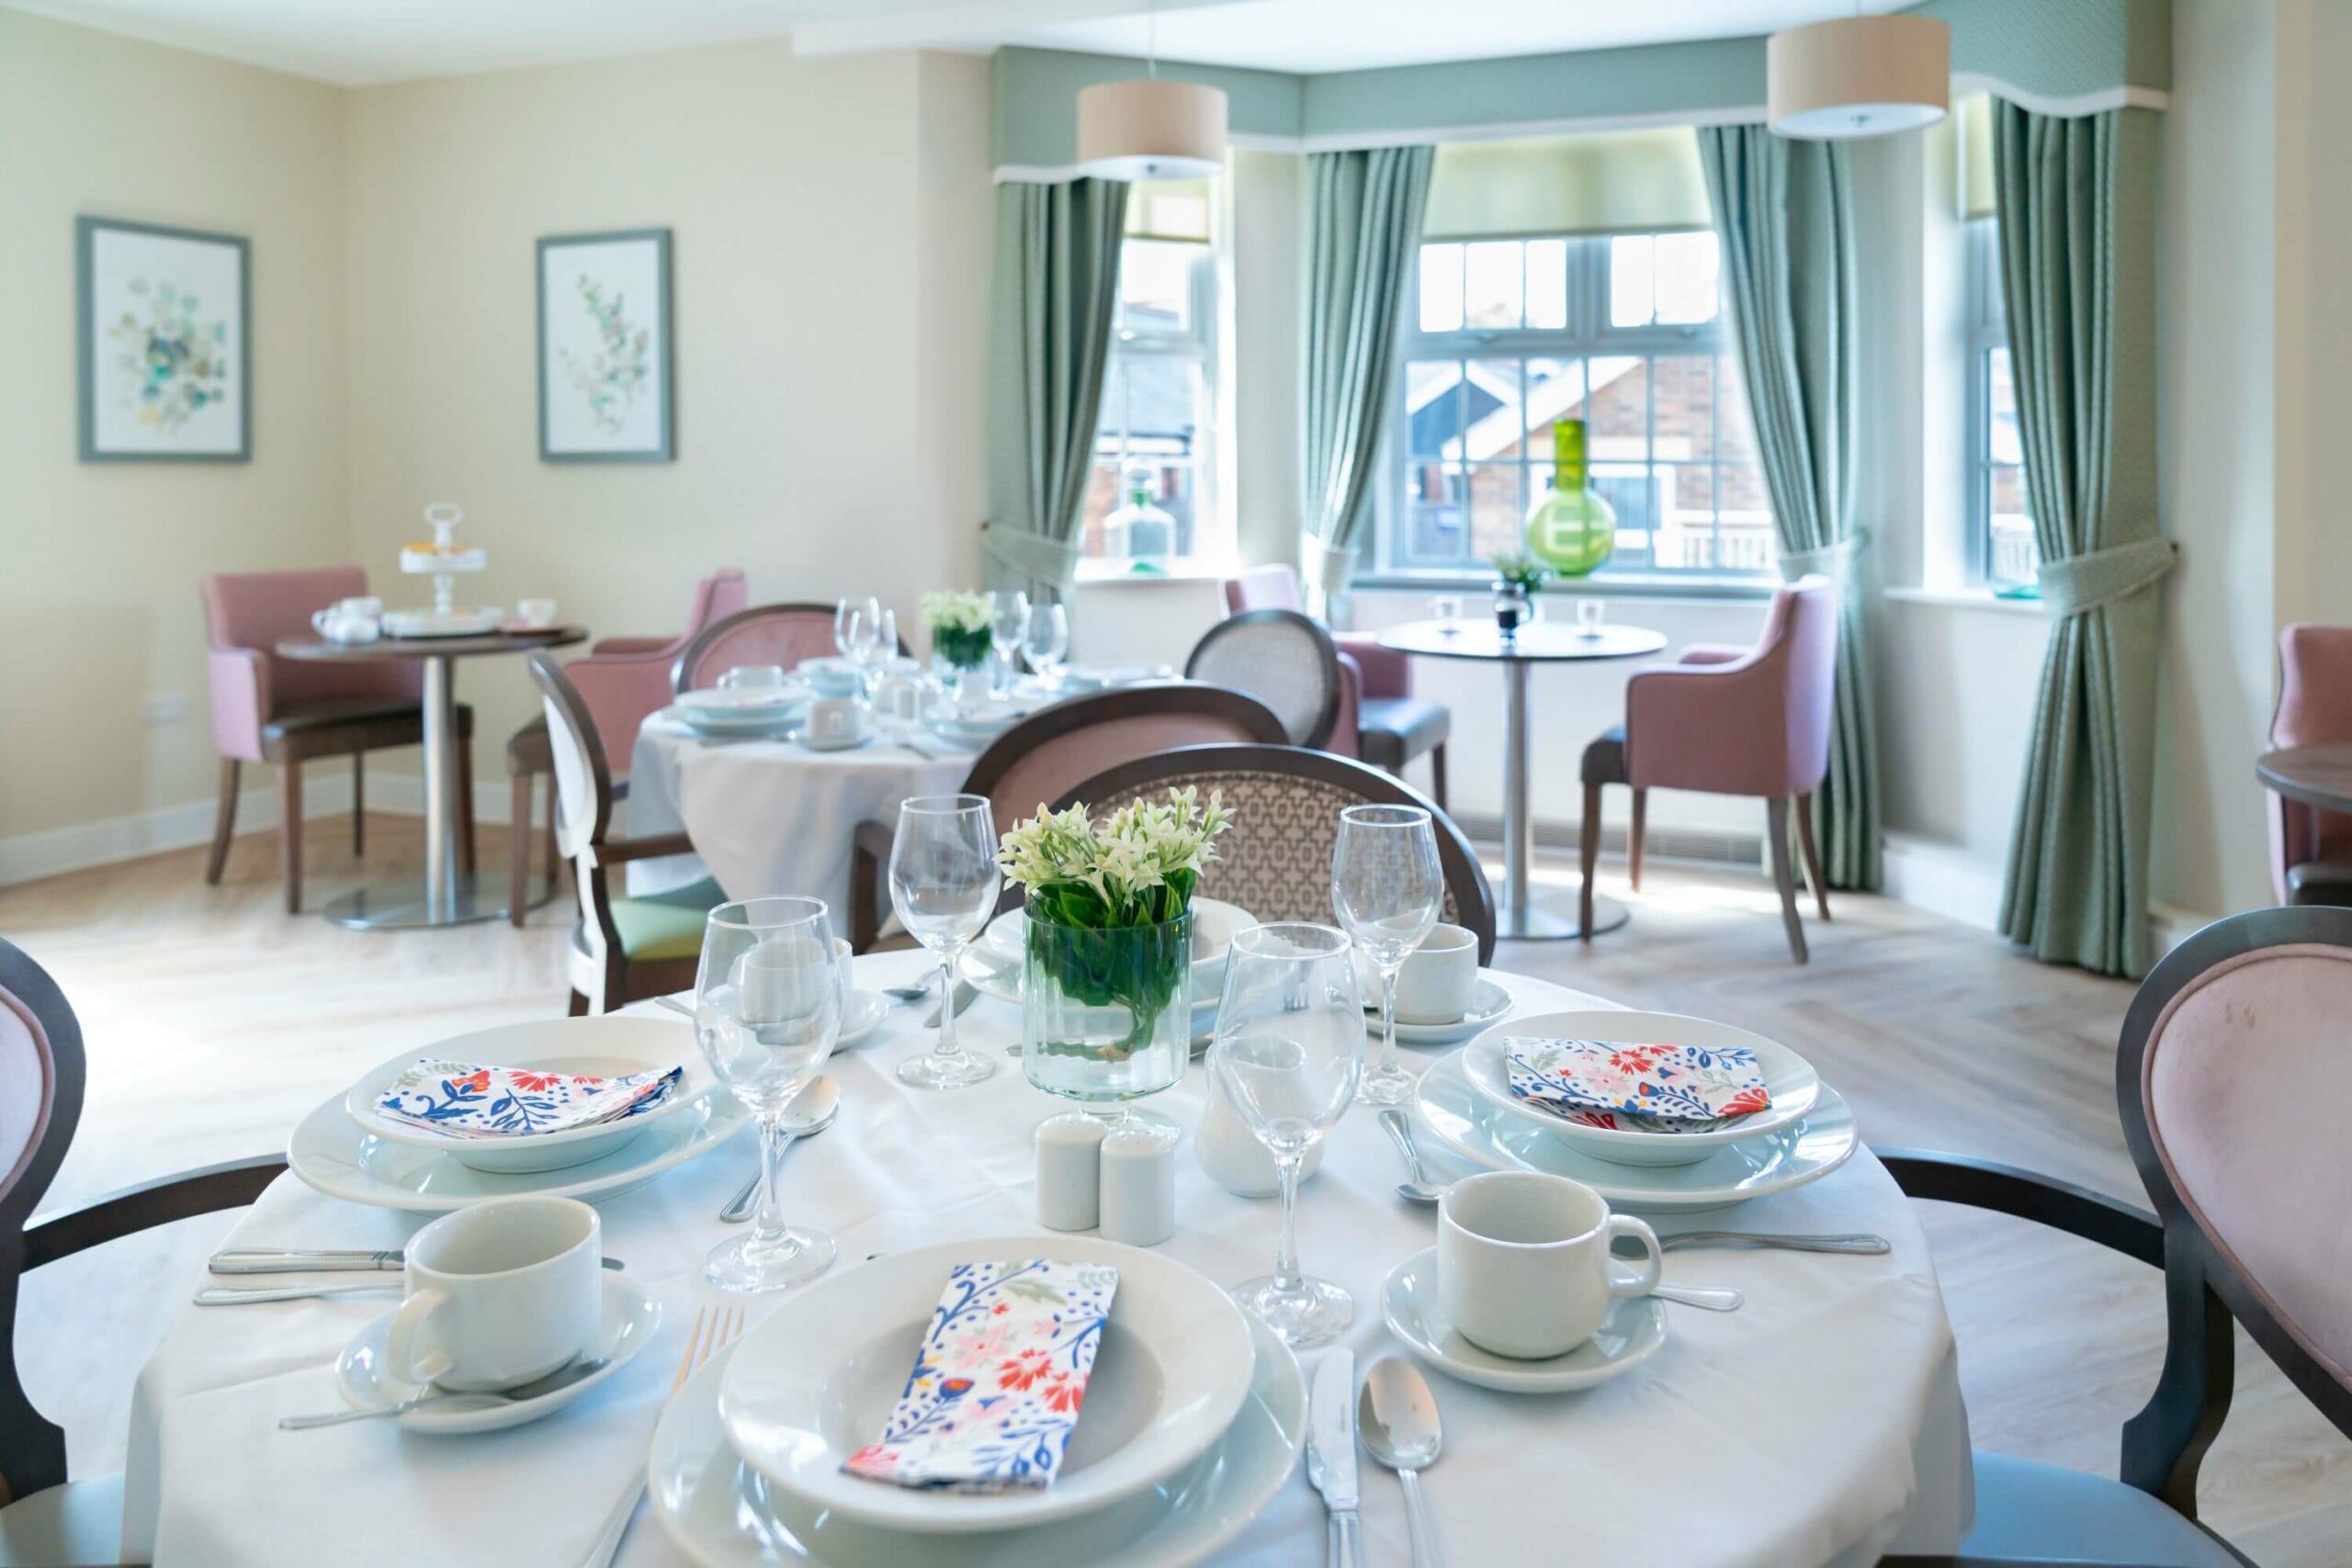 Dining area at White House Care Home